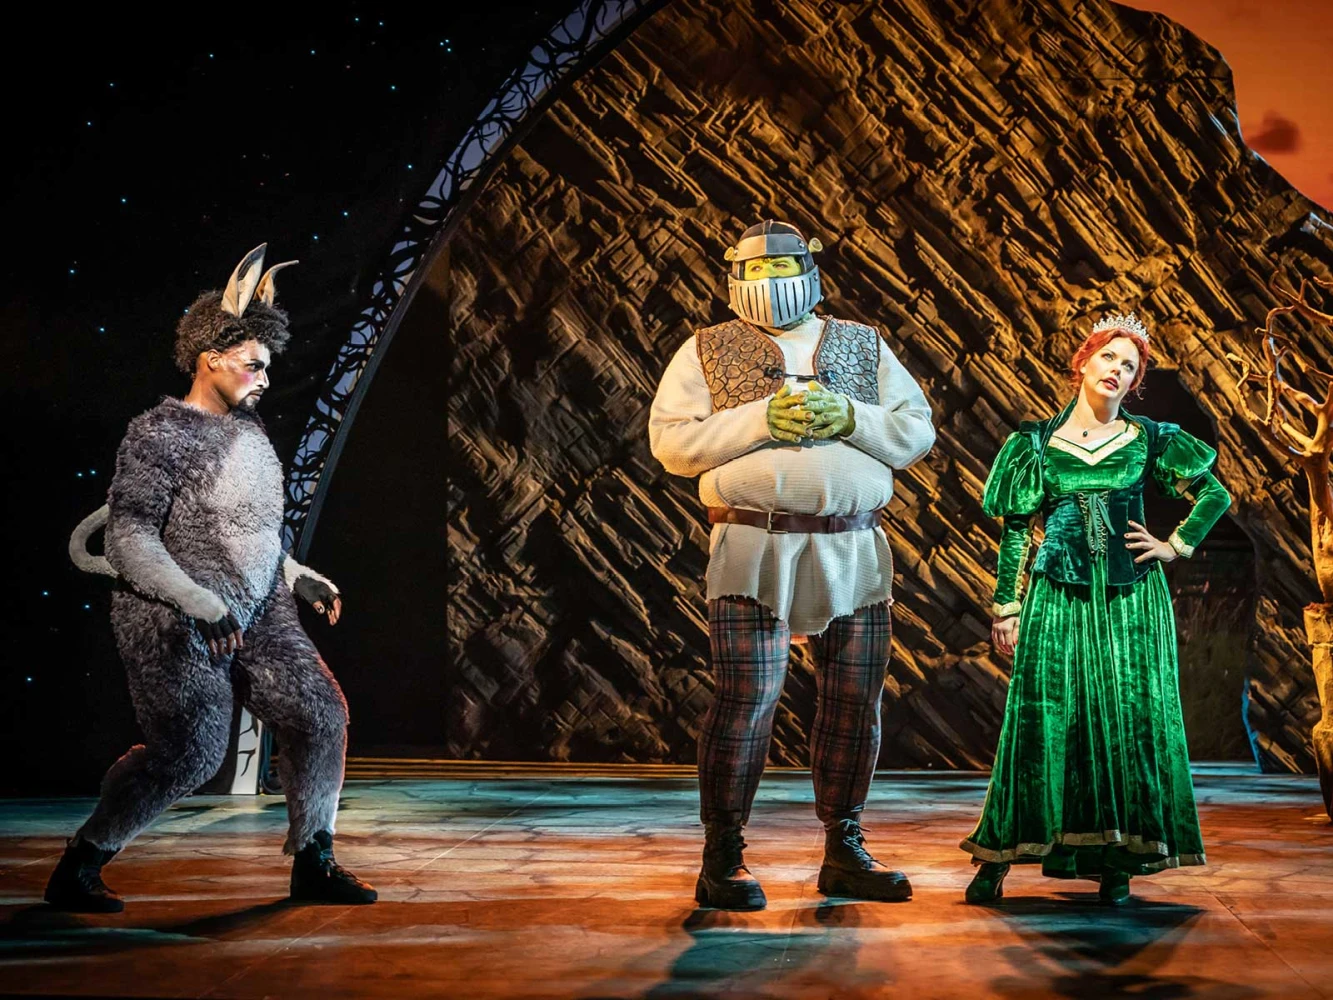 Shrek The Musical: What to expect - 1